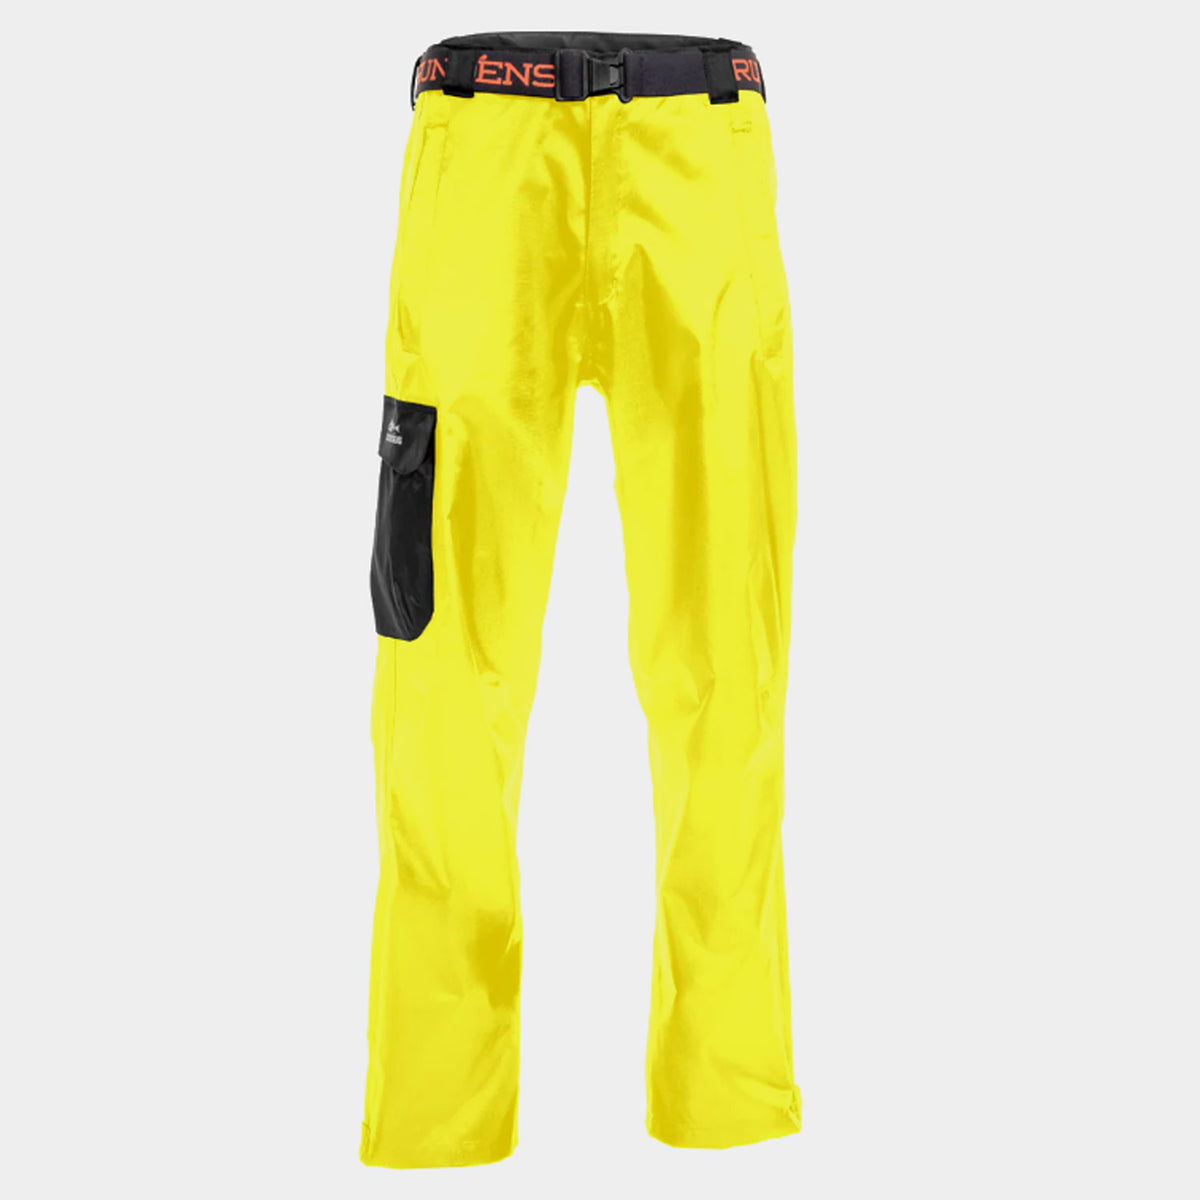 Grundens Weather Watch WP Fishing Pant - Work World - Workwear, Work Boots, Safety Gear